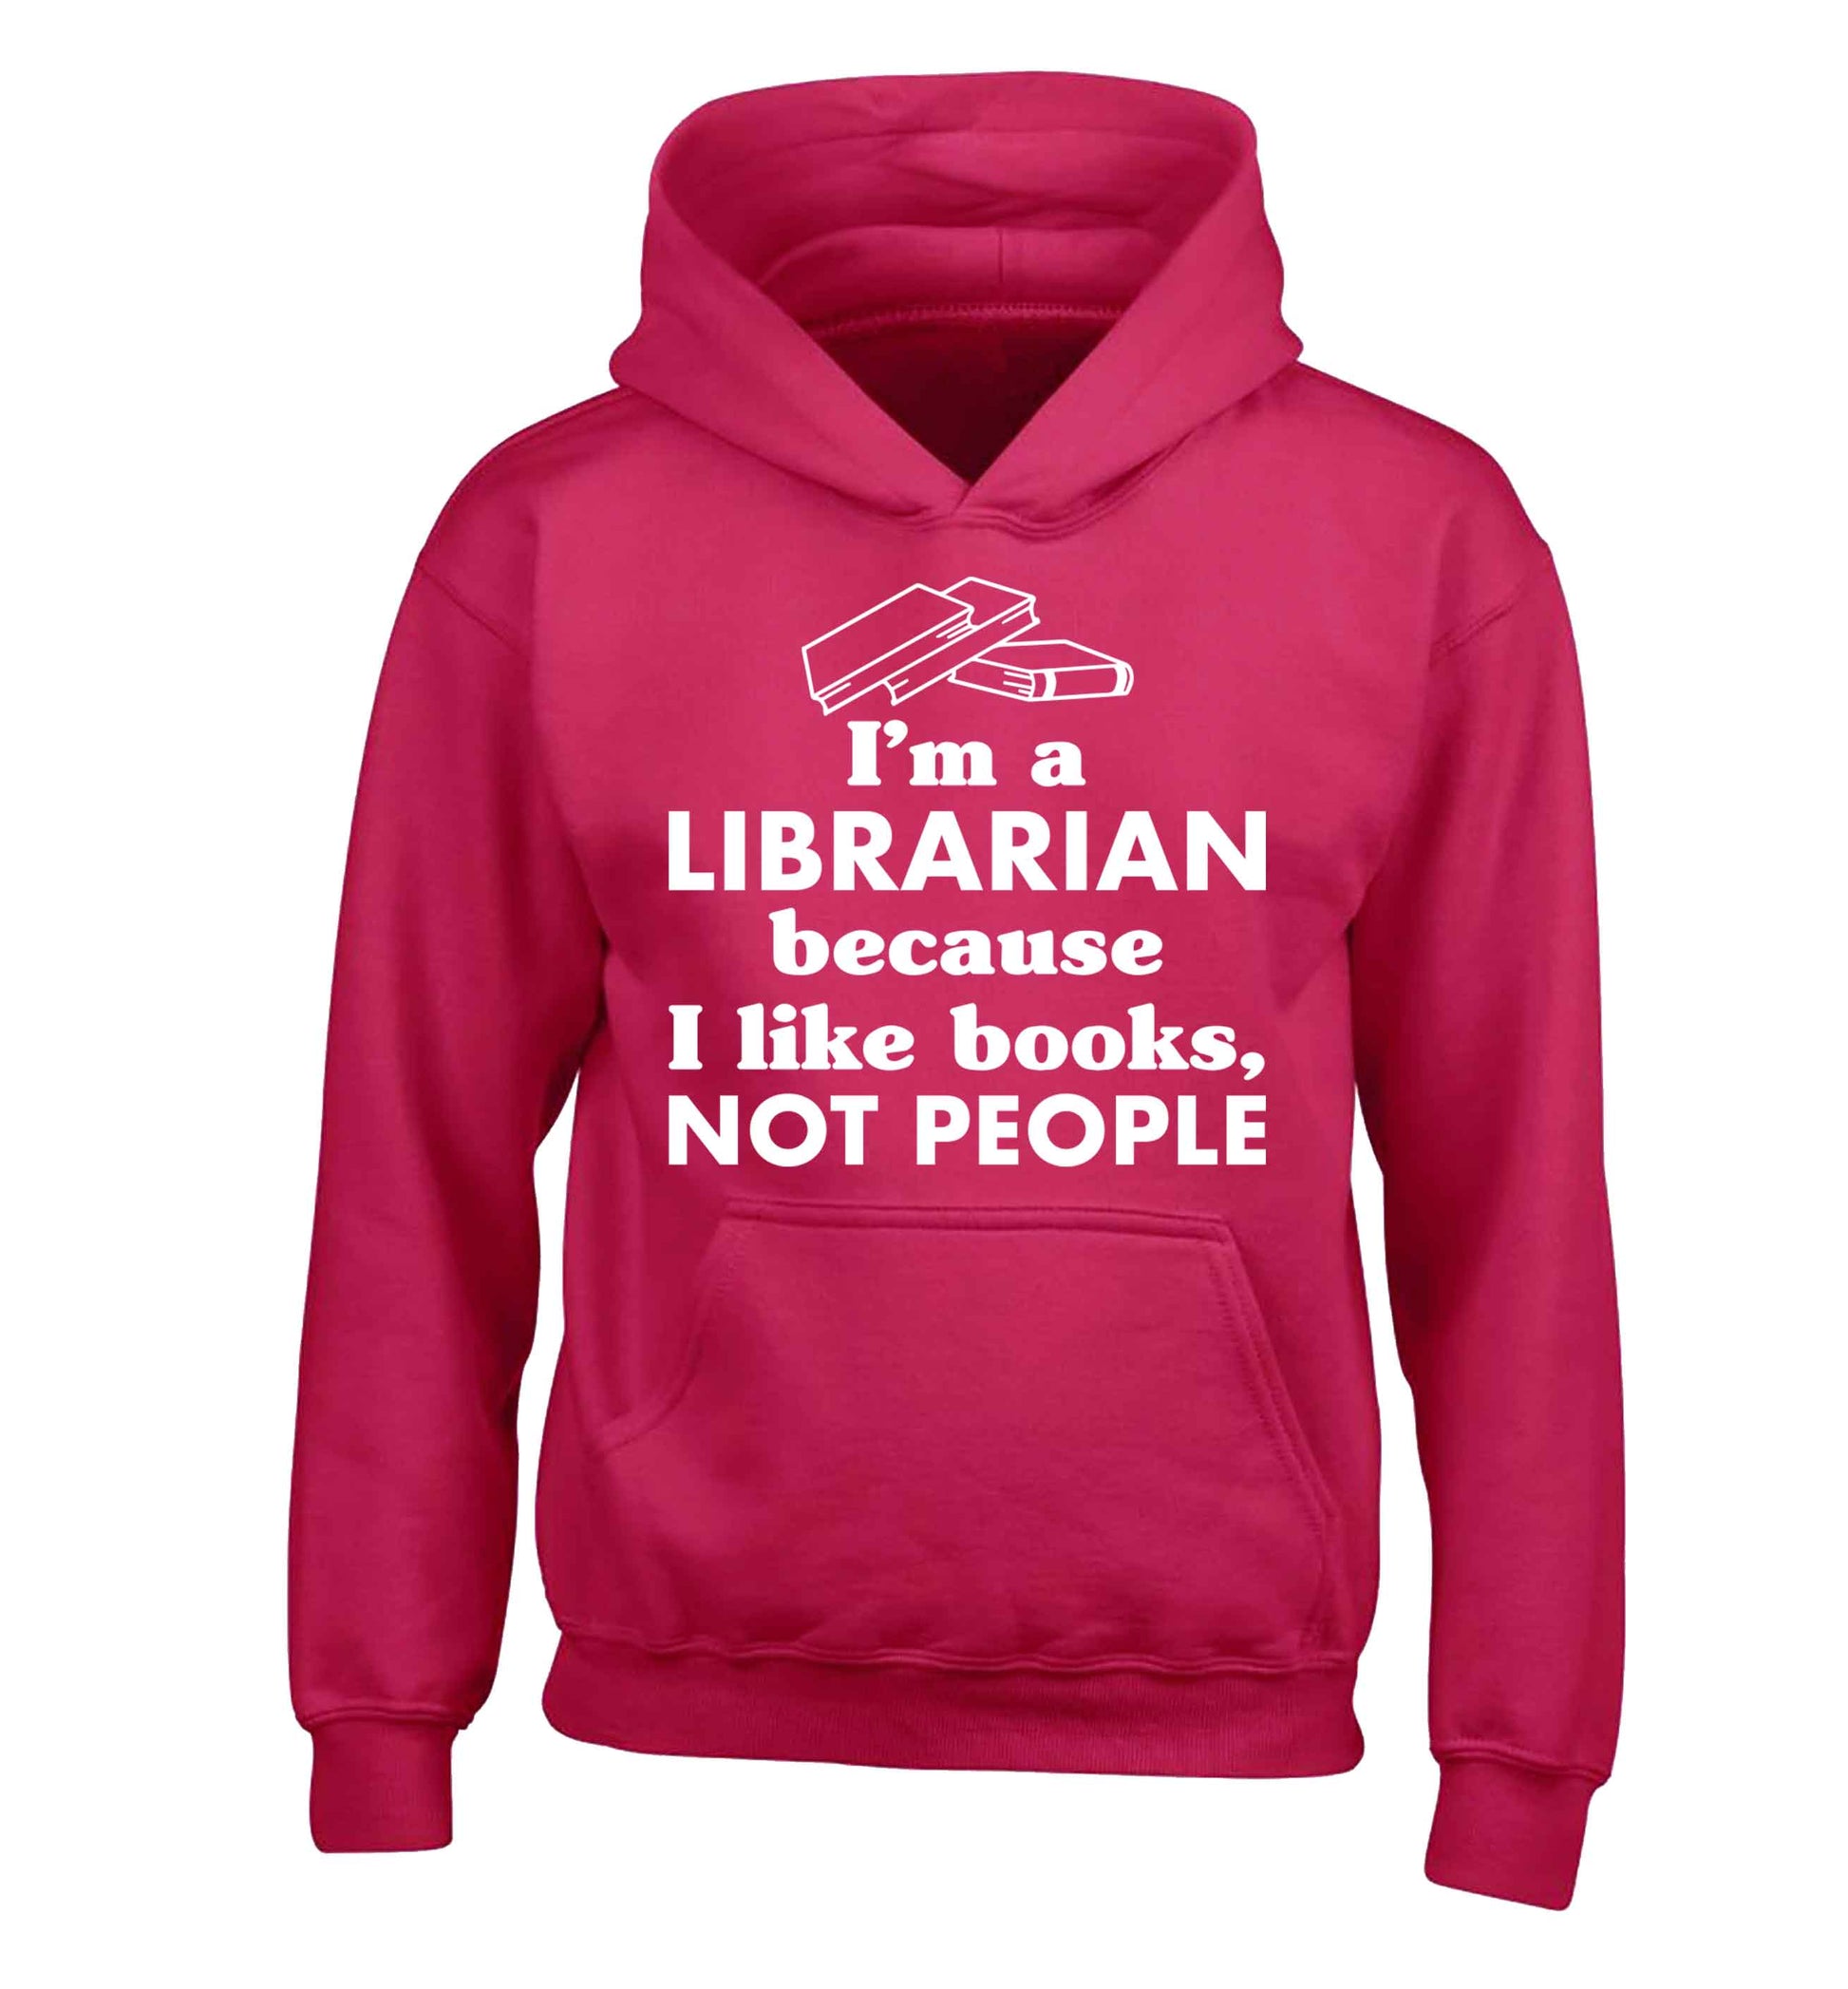 I'm a librarian because I like books not people children's pink hoodie 12-13 Years